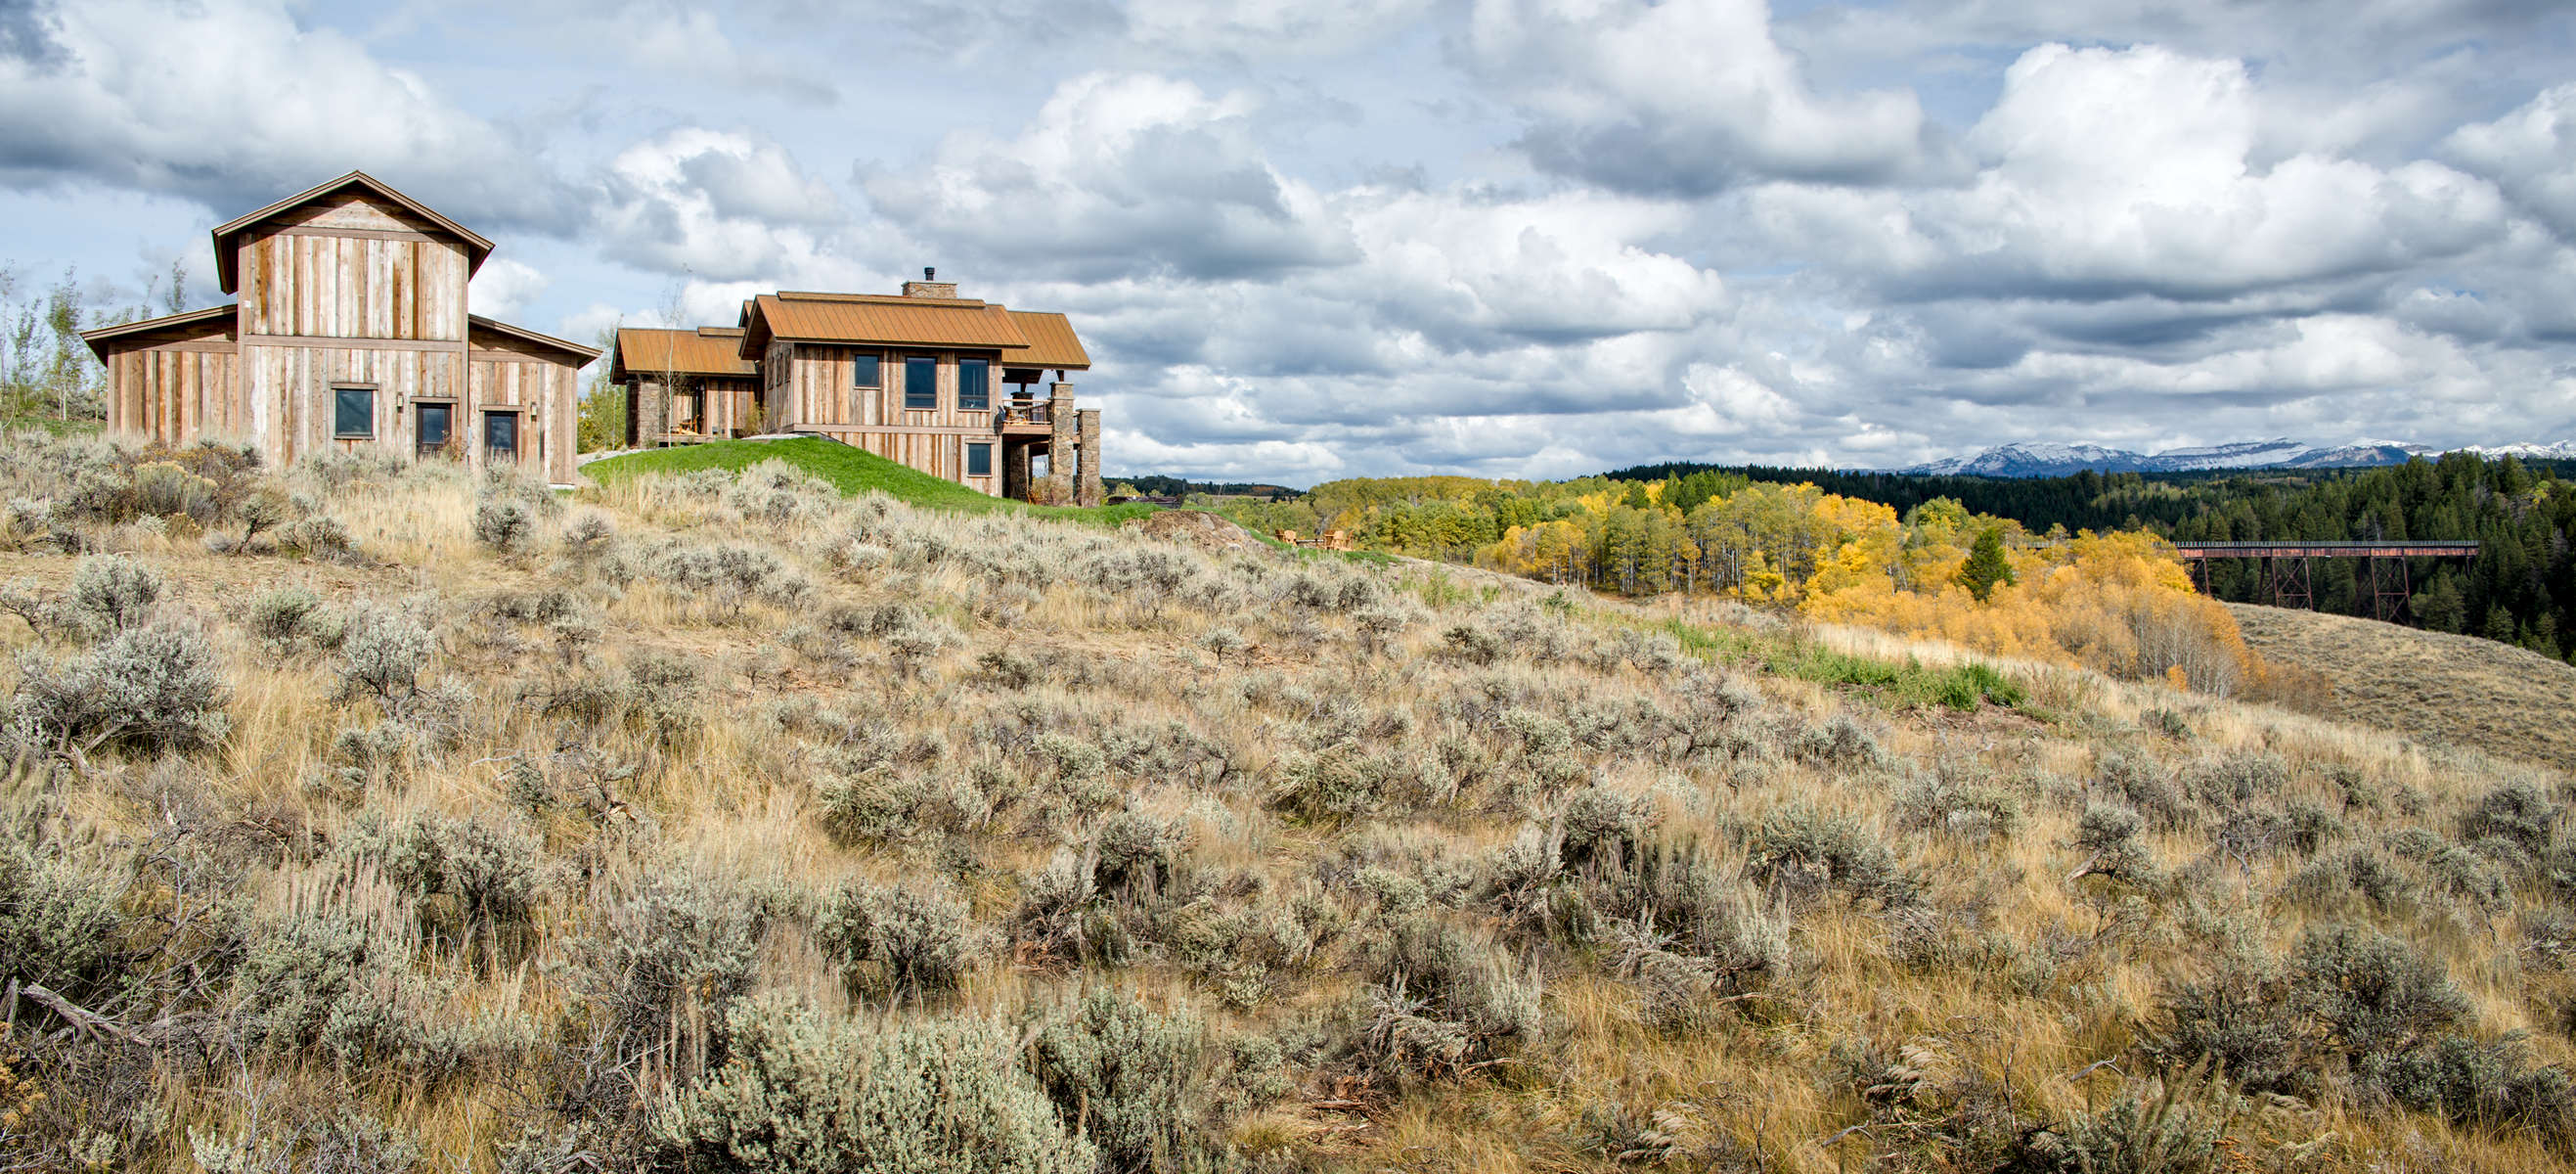 Long distance view of a mountain rustic home surrounded by rolling hills and golden stands of Aspen trees in eastern Idaho.The viewer can also see an old train trestle which has been converted to a bike path.